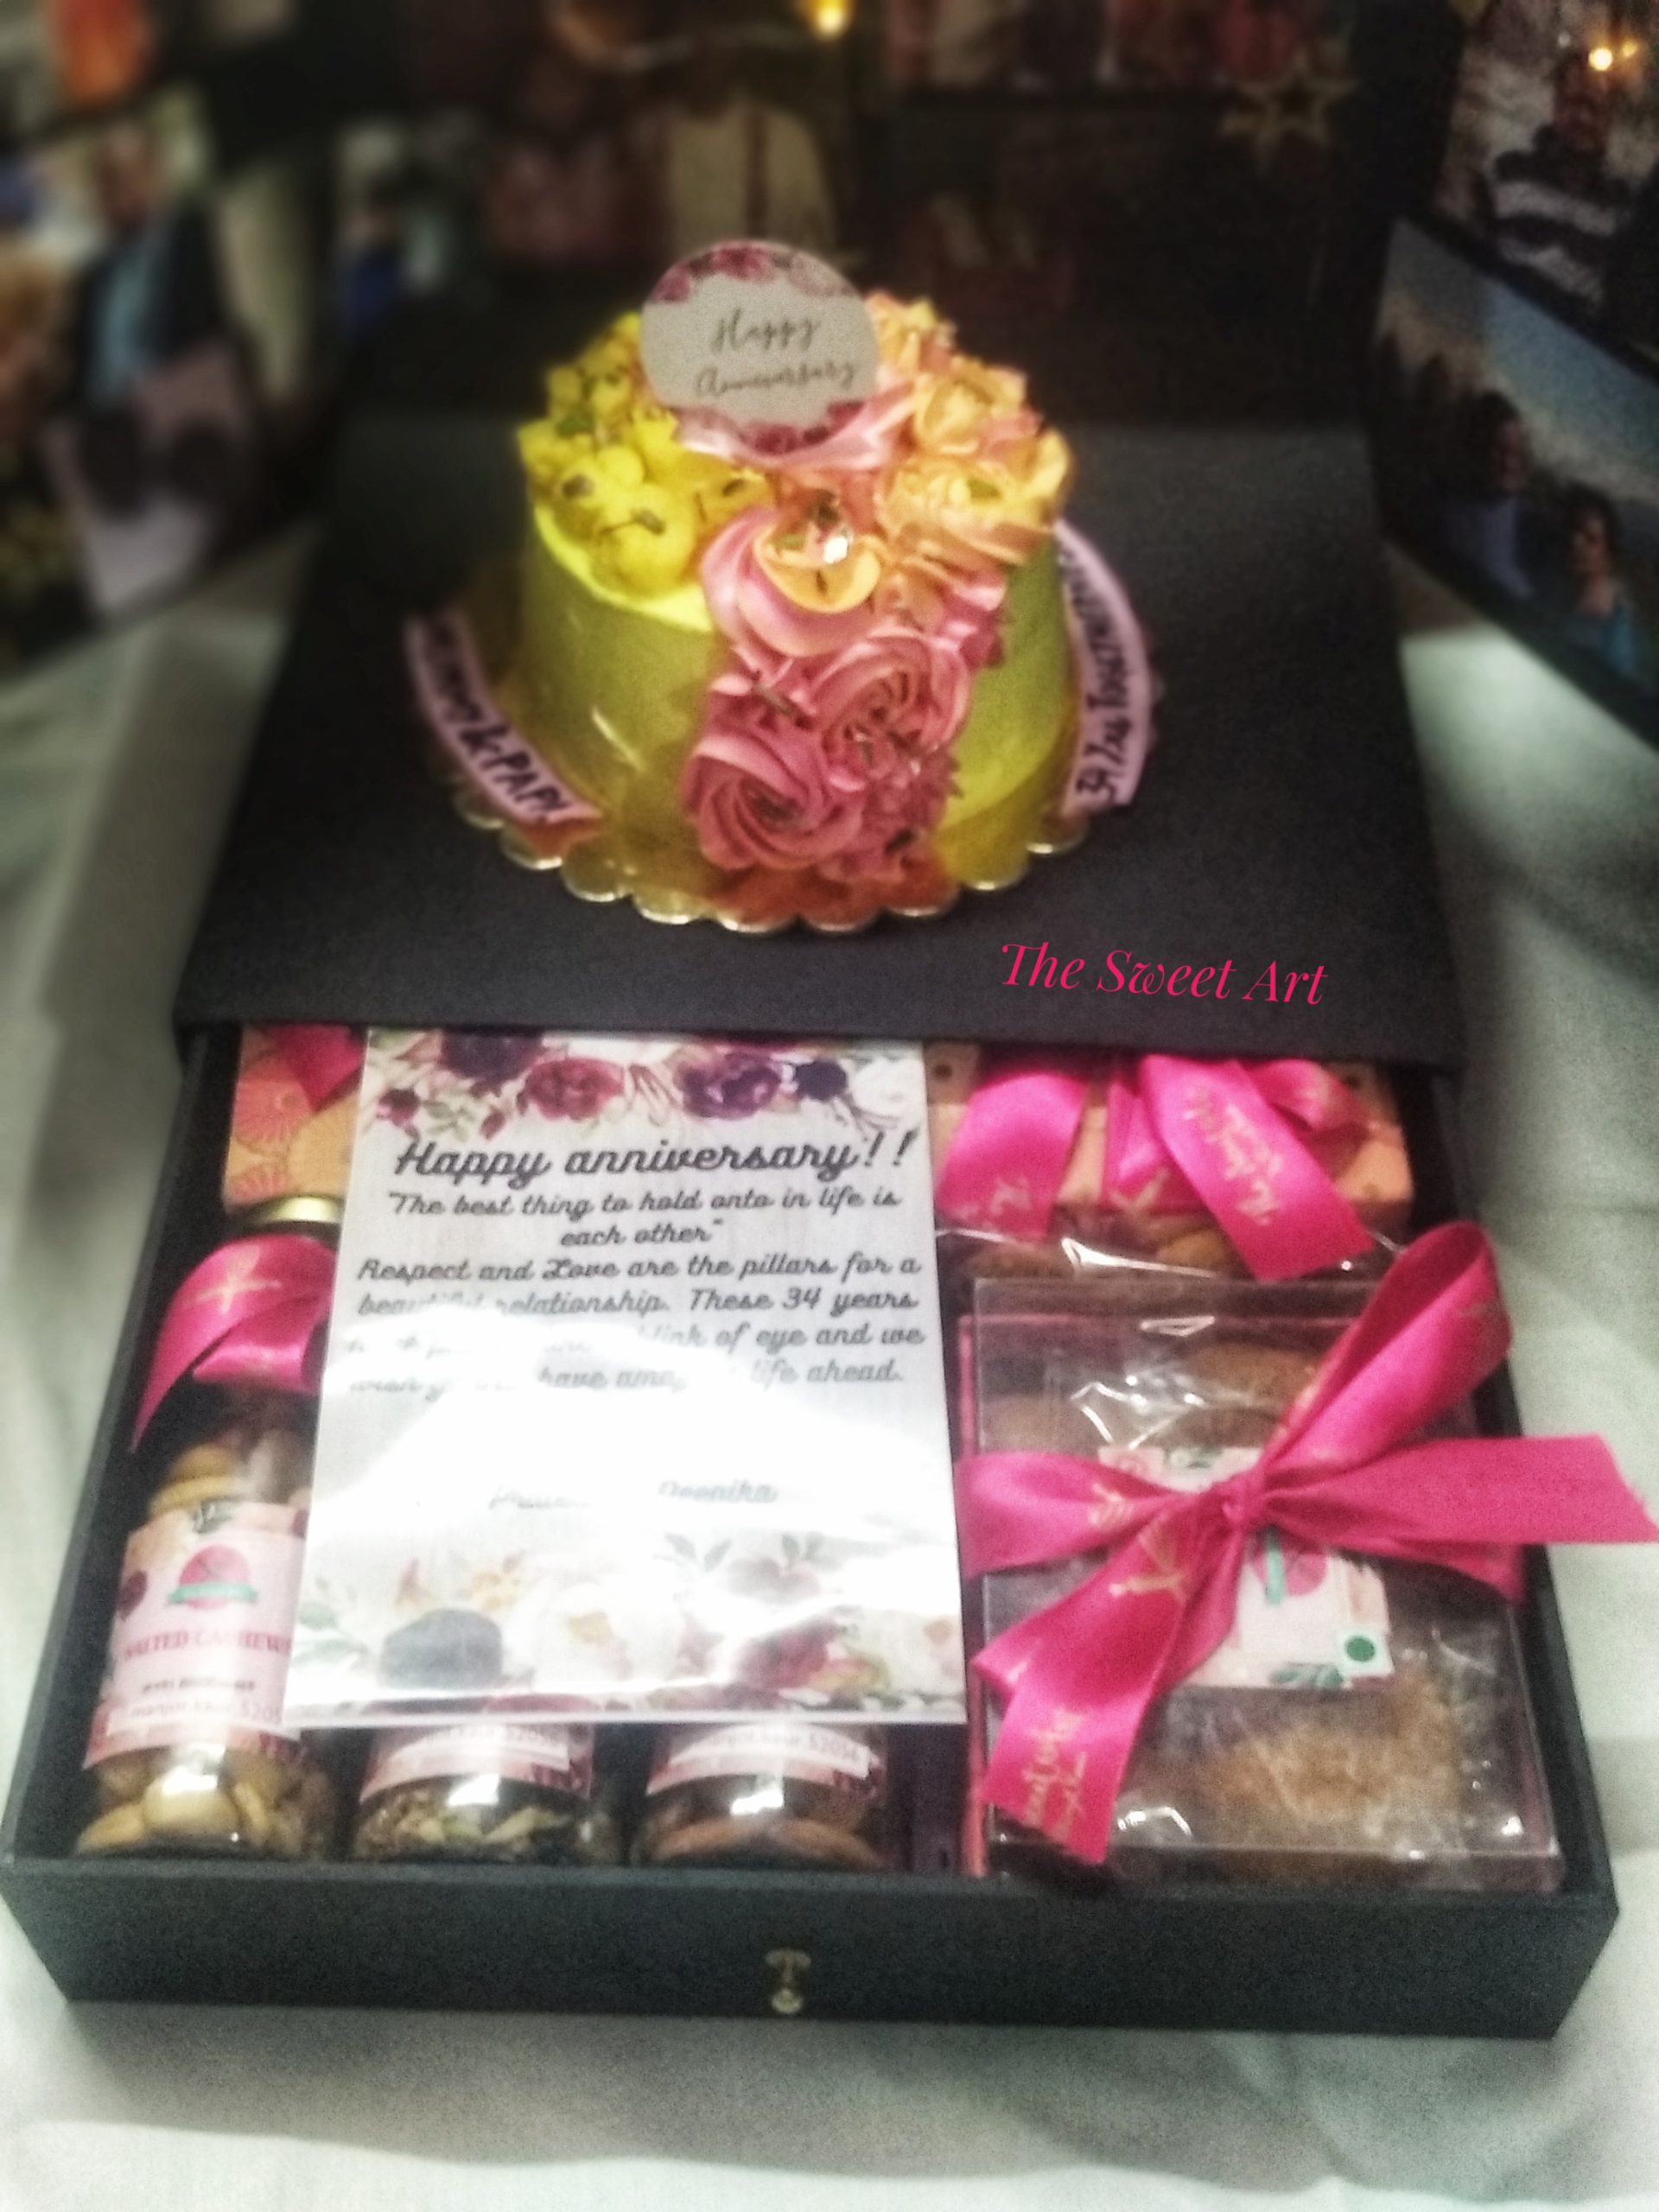 Surprise Box with Cake Designs, Images, Price Near Me